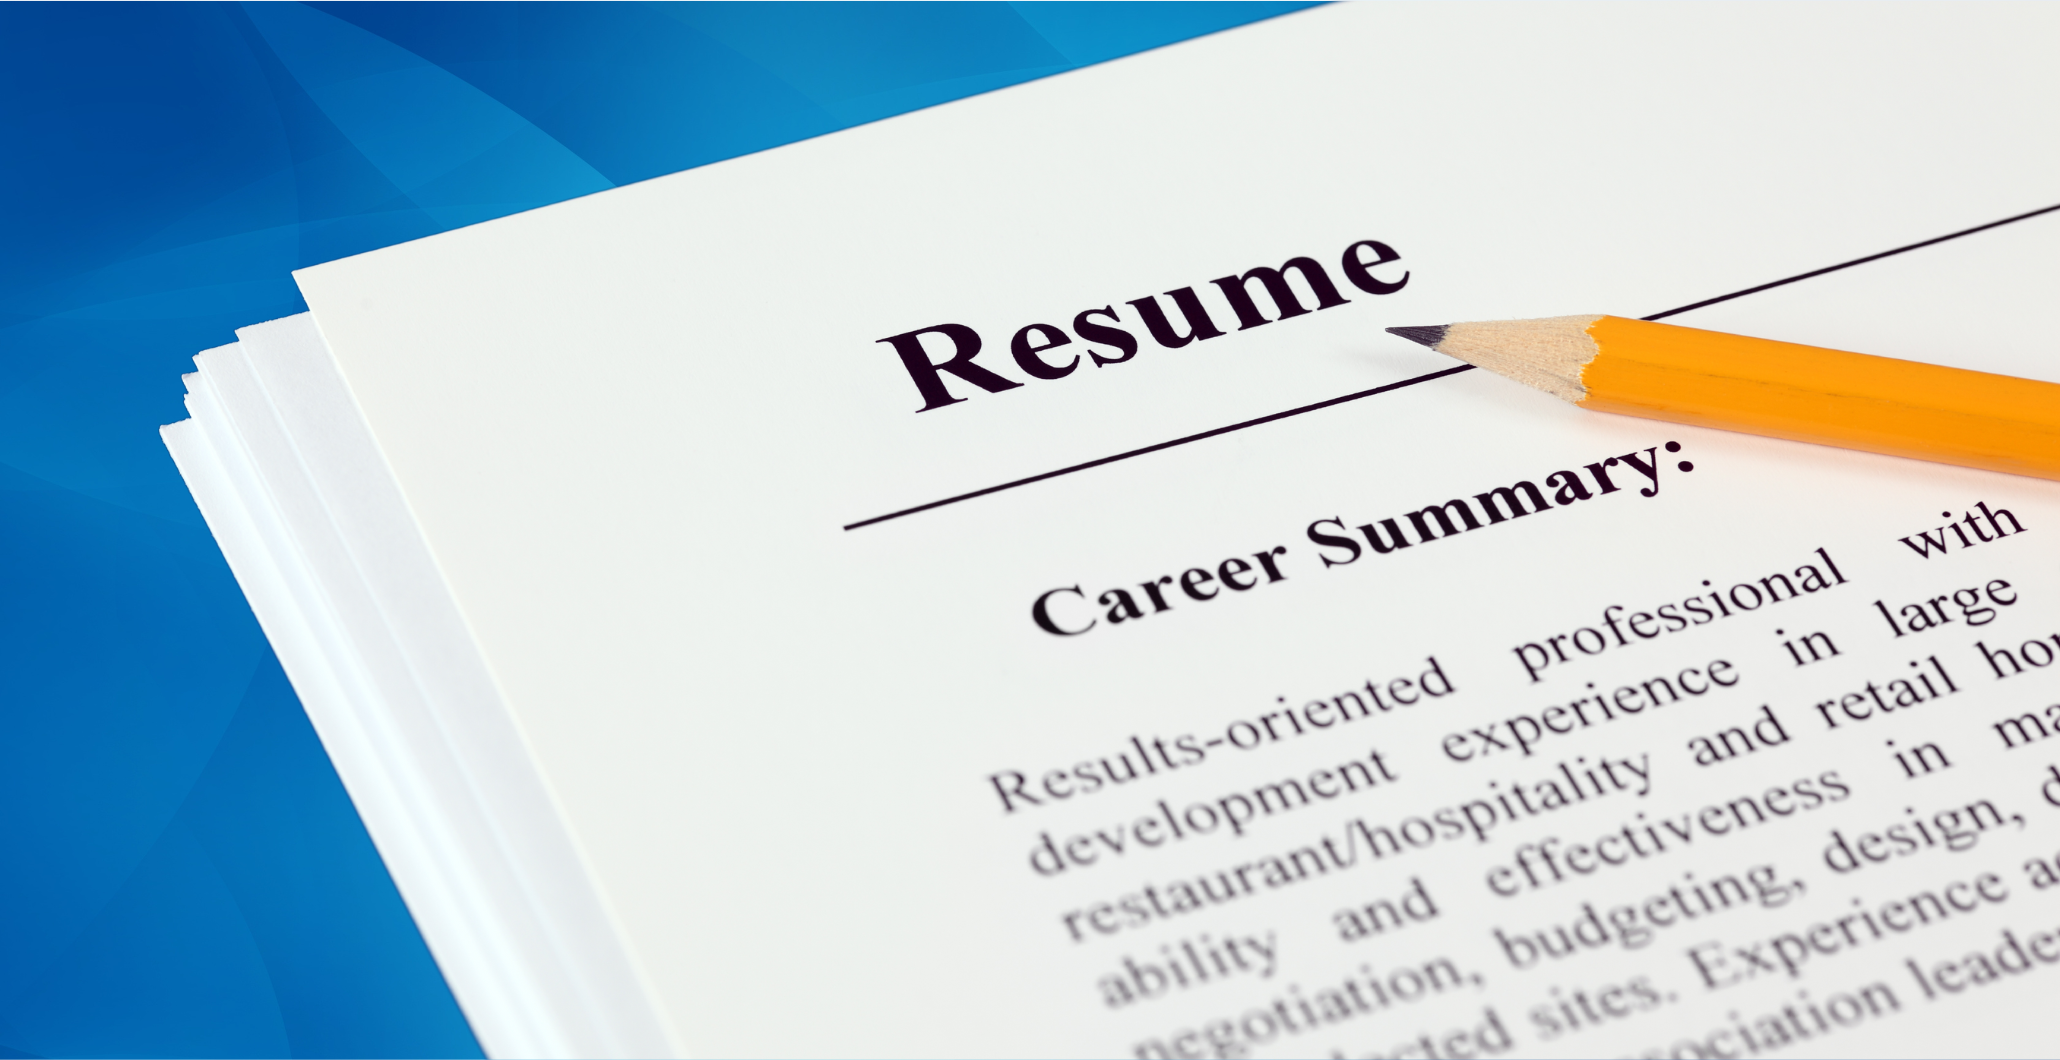 Writing Effective Resumes and Cover Letters